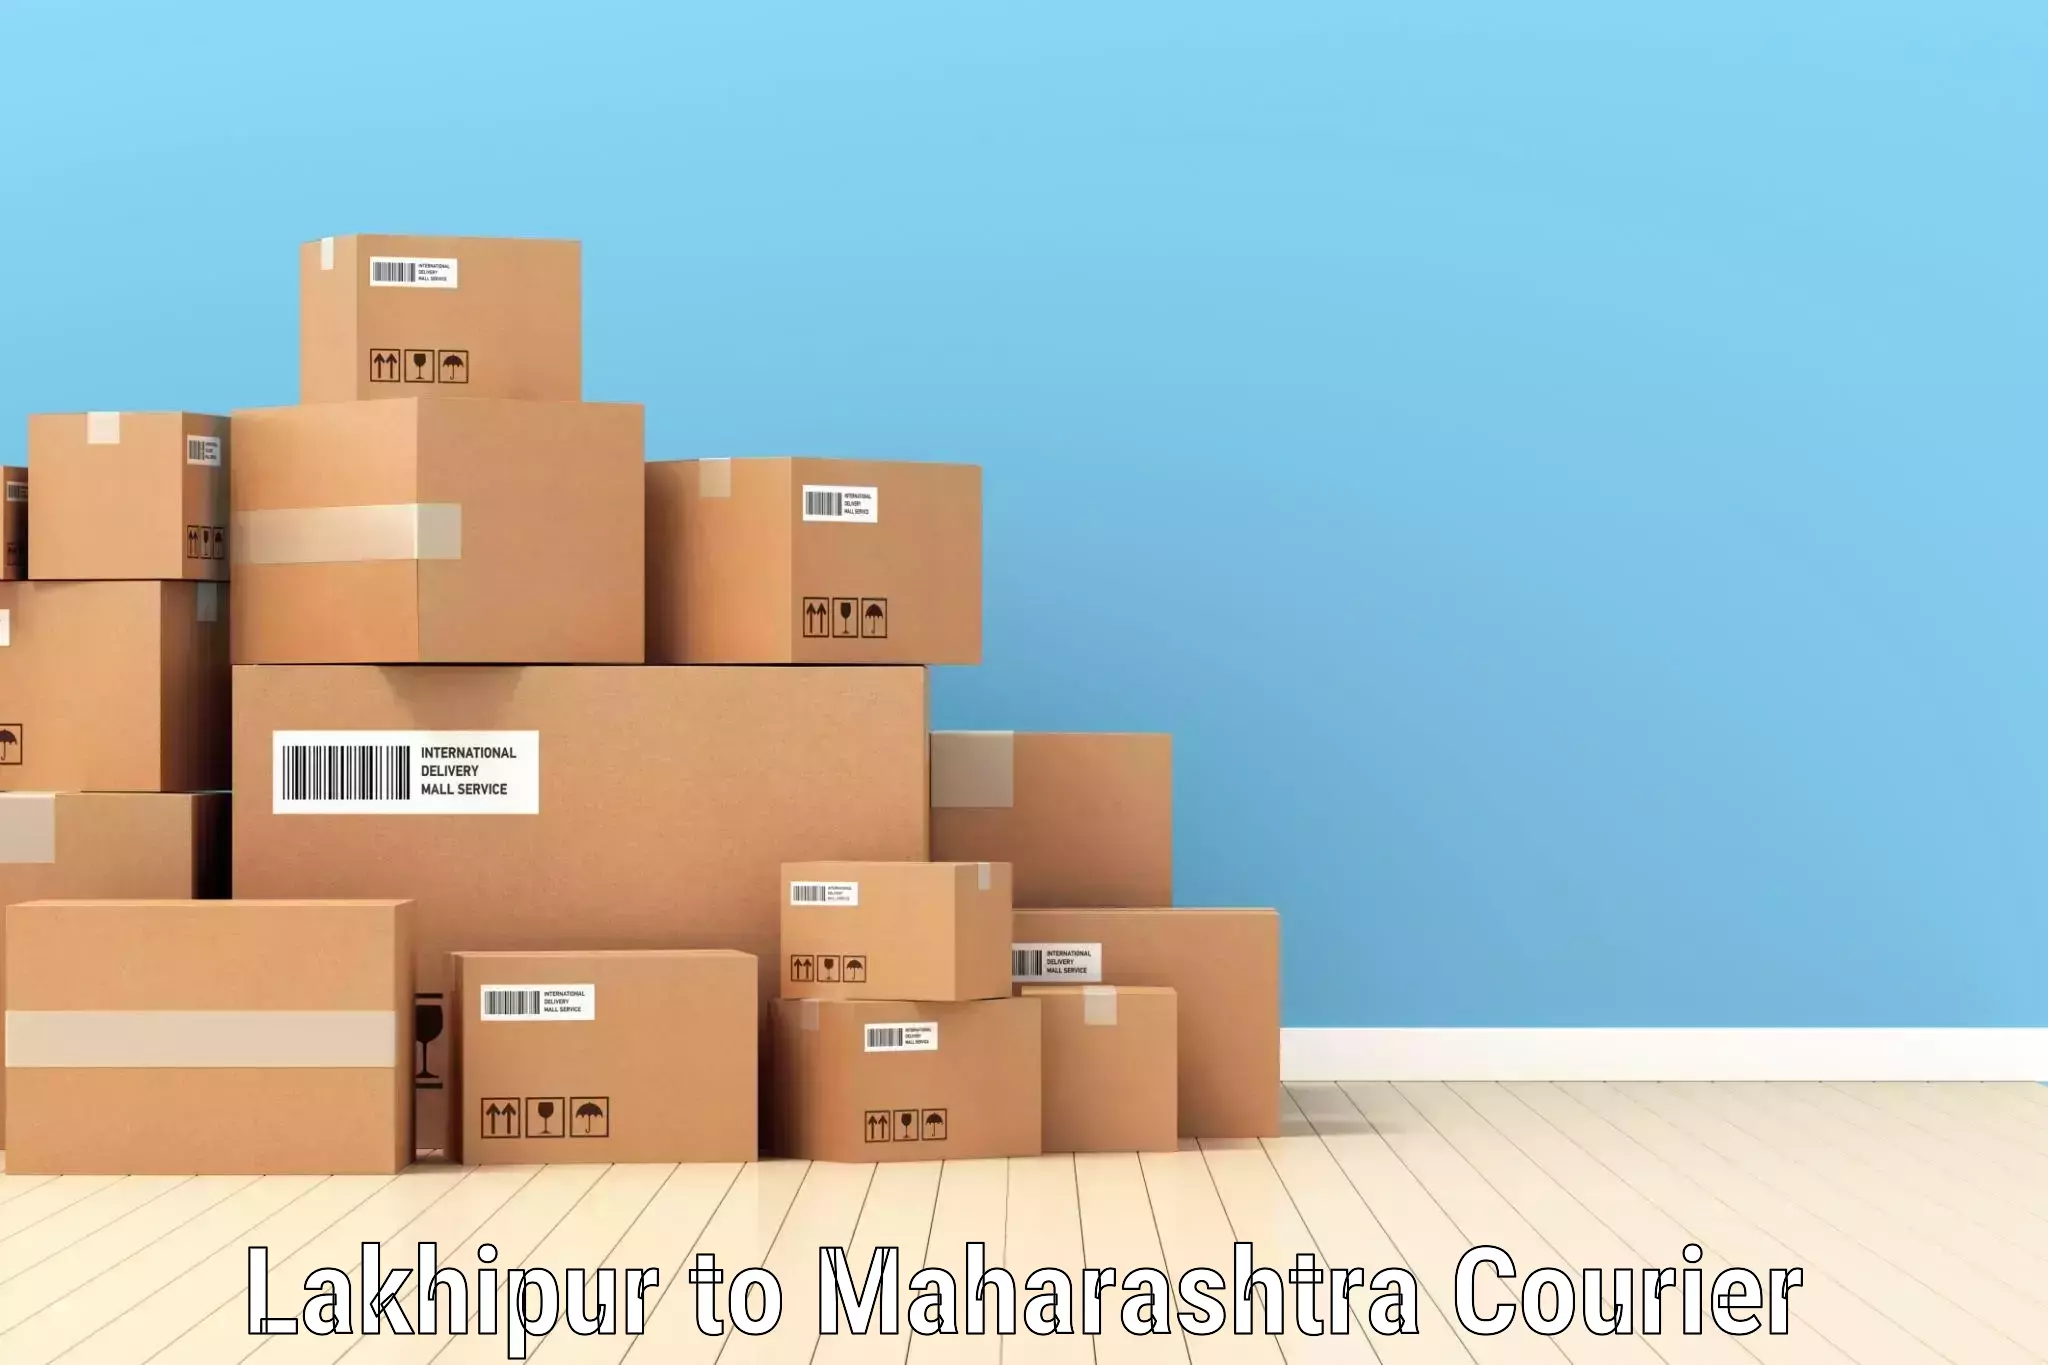 Nationwide parcel services Lakhipur to Ballarpur